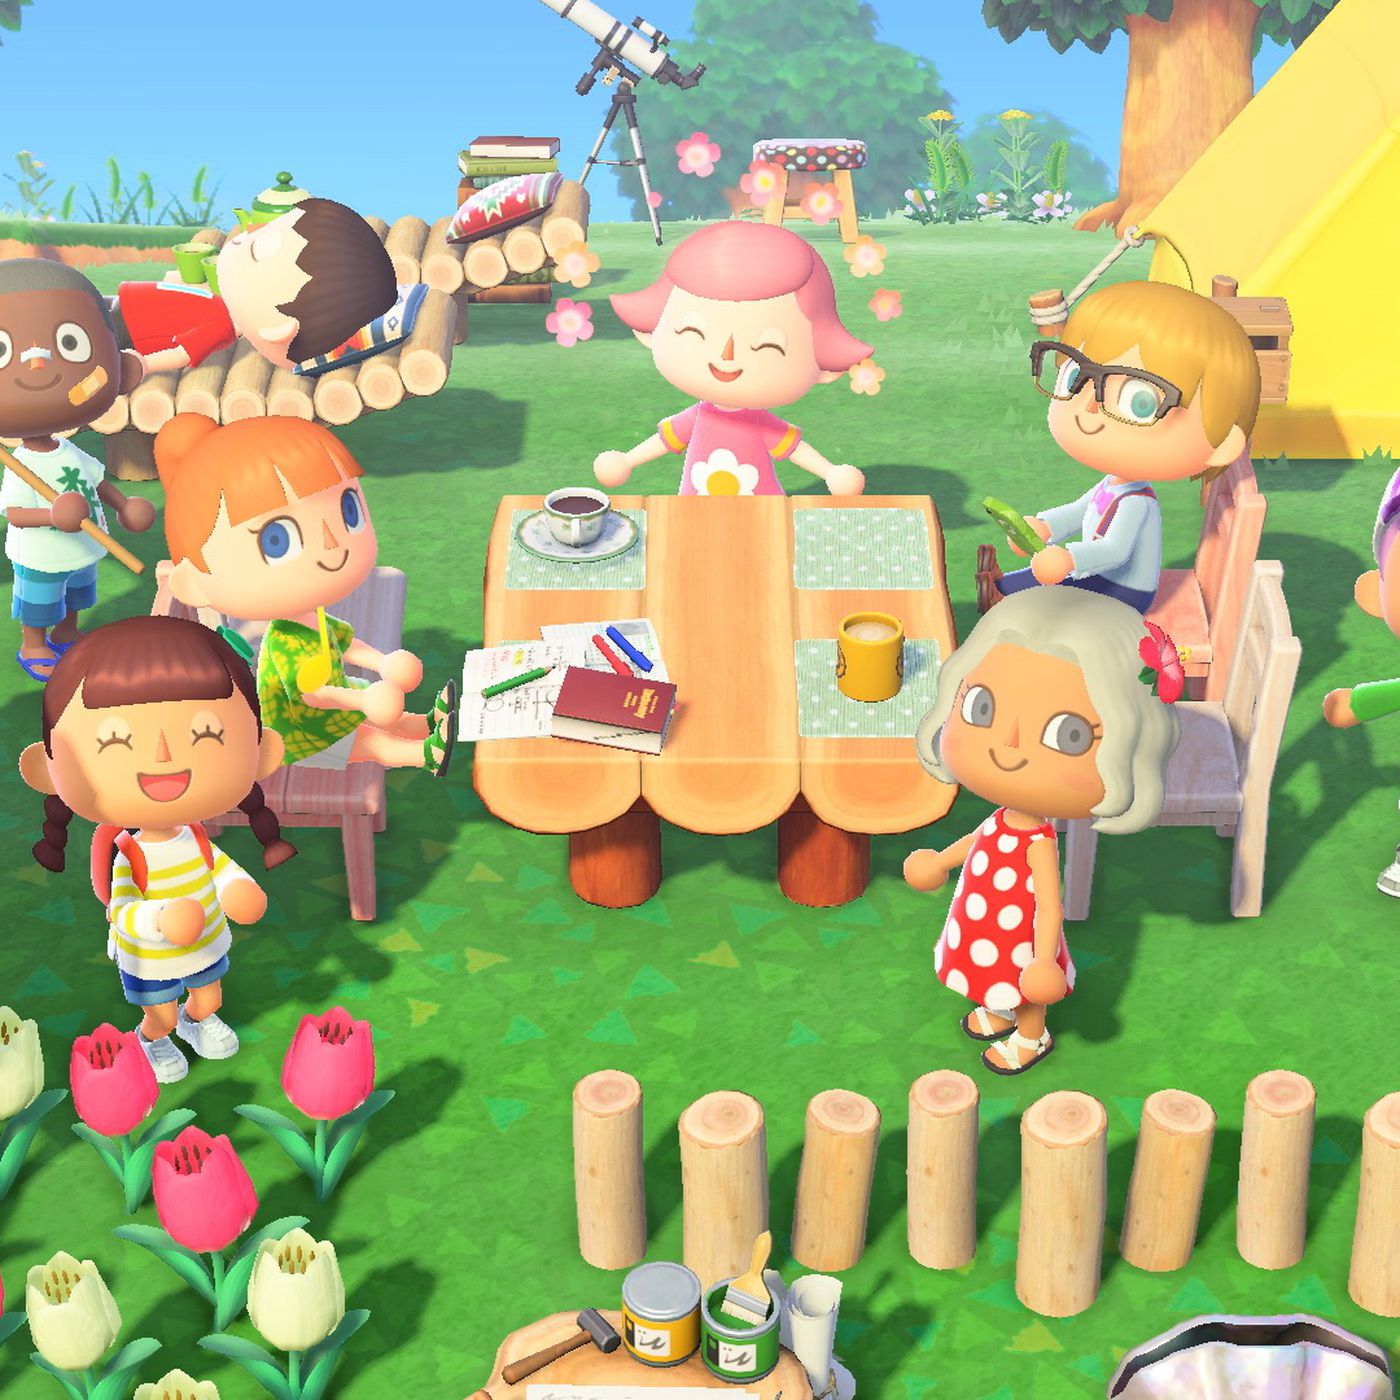 Animal Crossing powers Nintendo to record Switch sales in Japan - The Verge